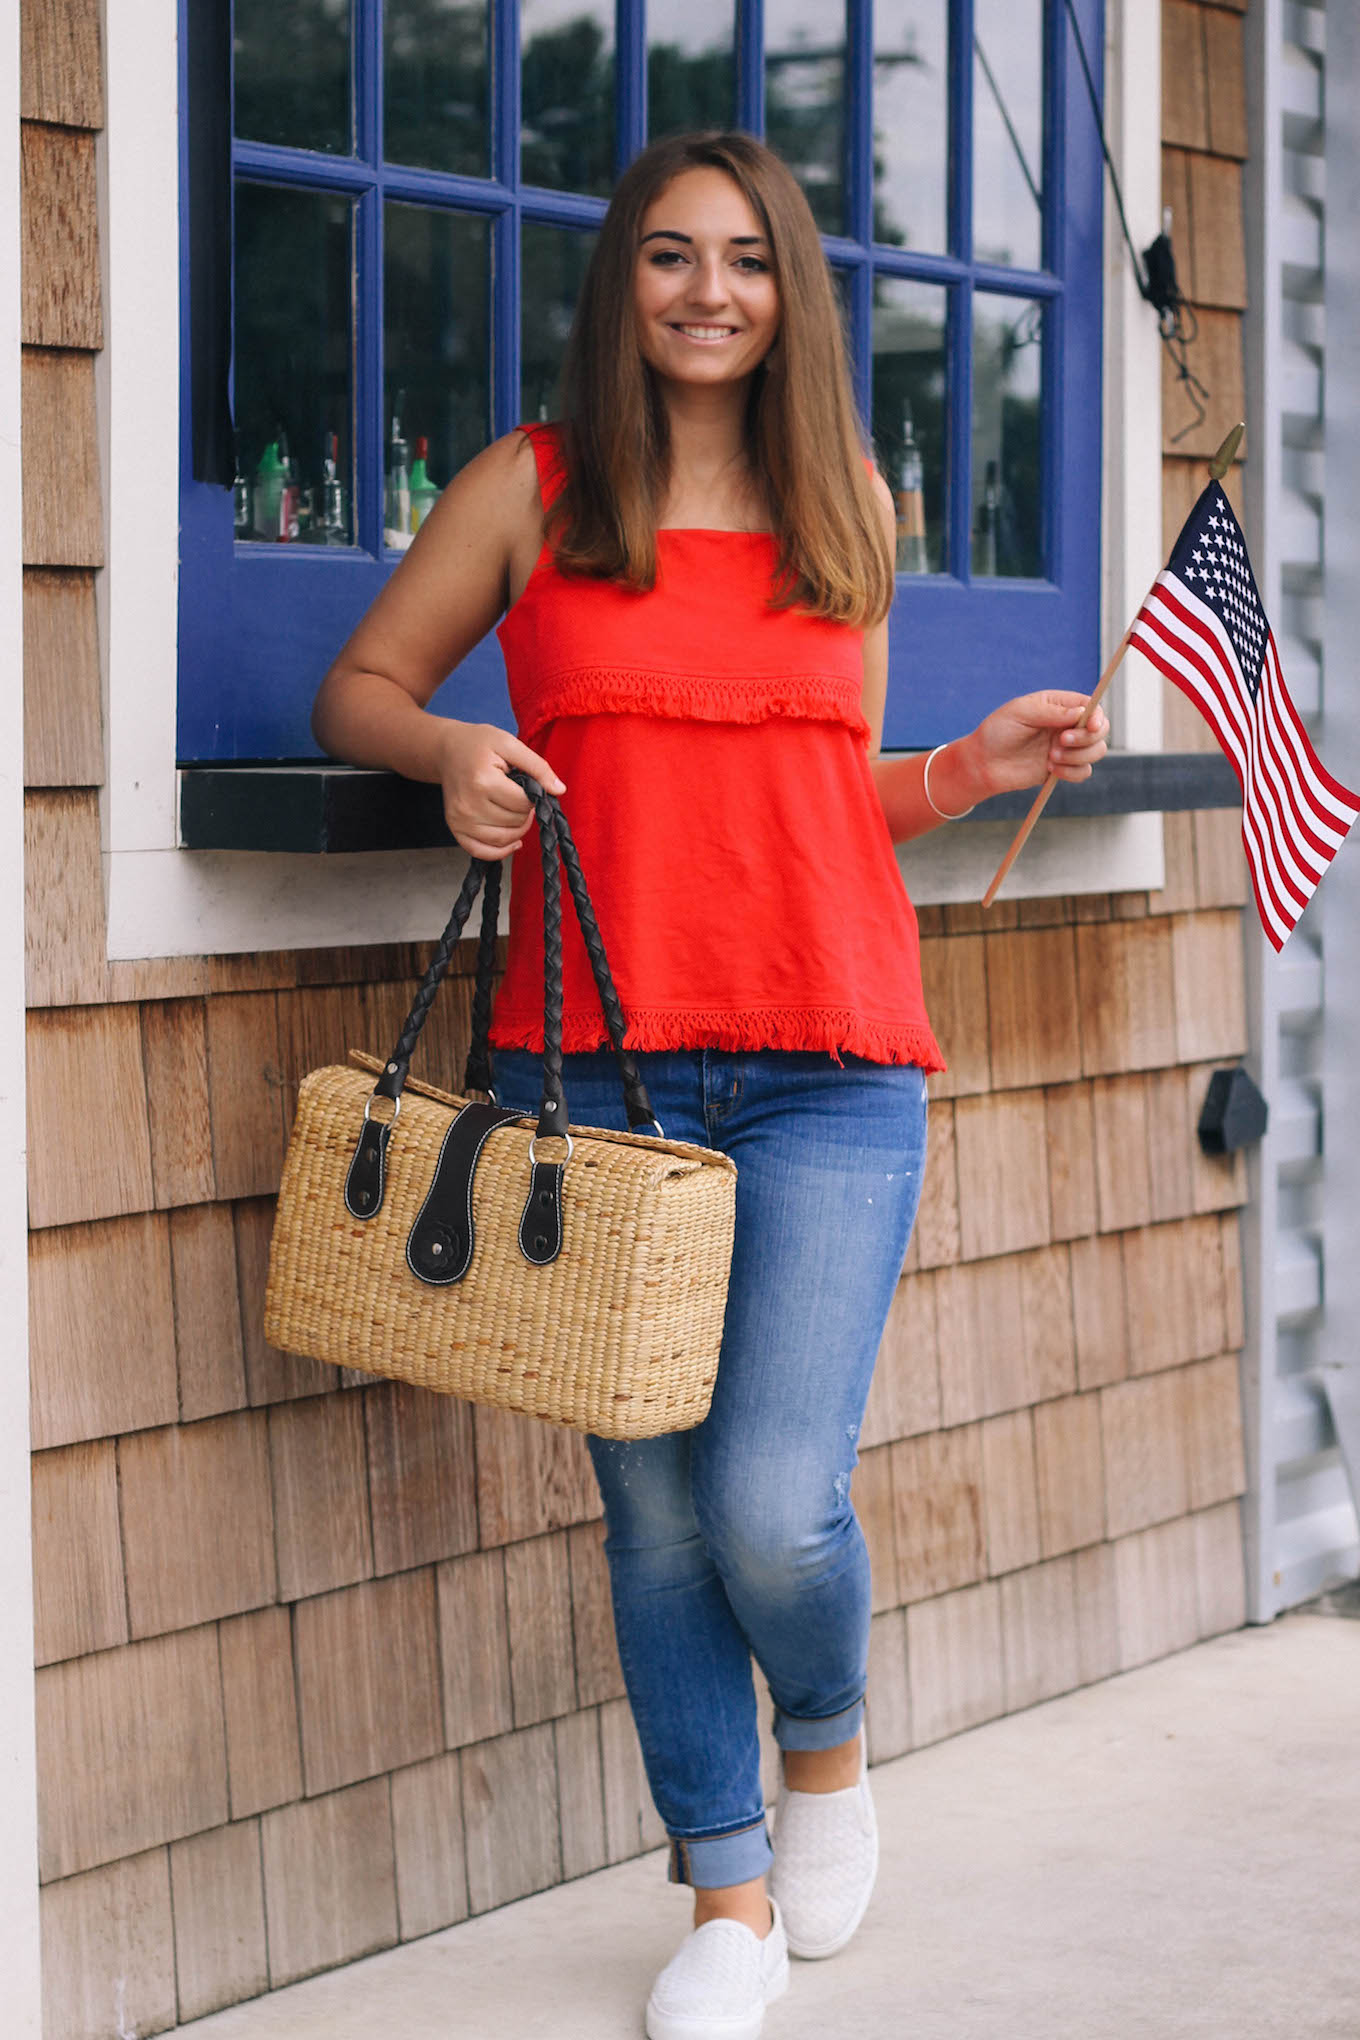 J.Crew Fourth of July Outfit Inspiration | The Coastal Confidence by Aubrey Yandow